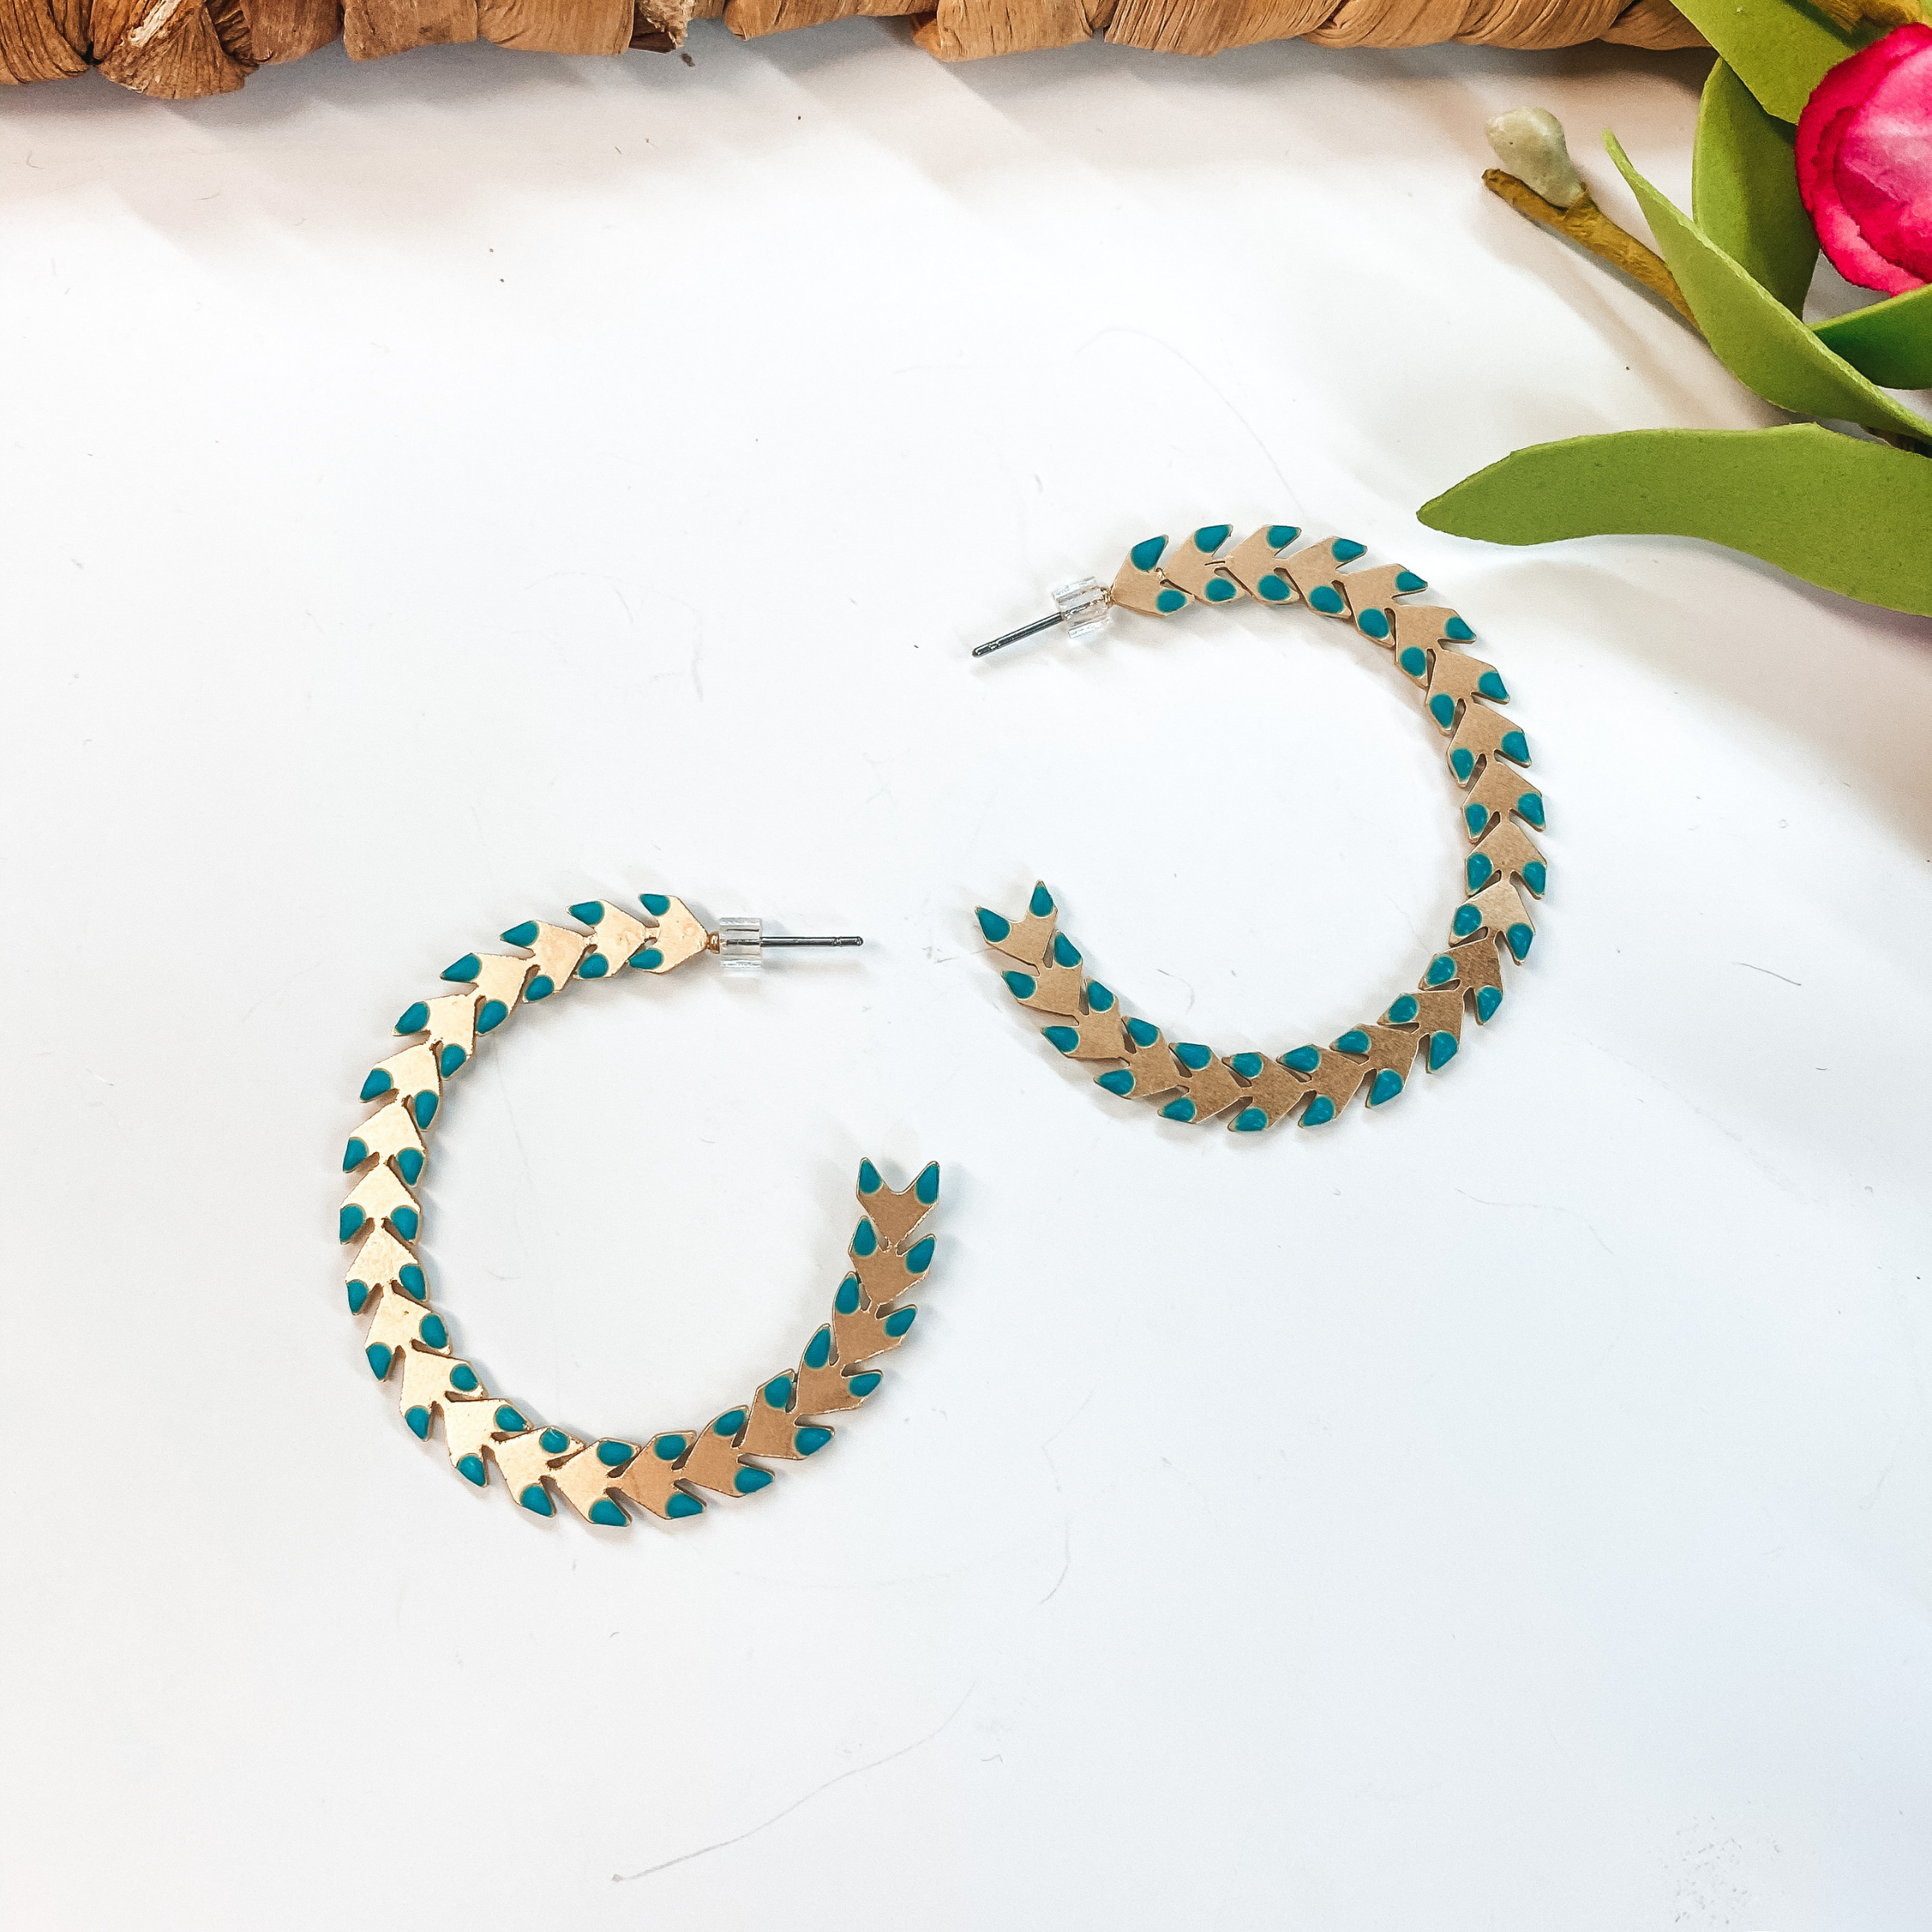 Spiked Hoop Earrings in Turquoise and Gold - Giddy Up Glamour Boutique